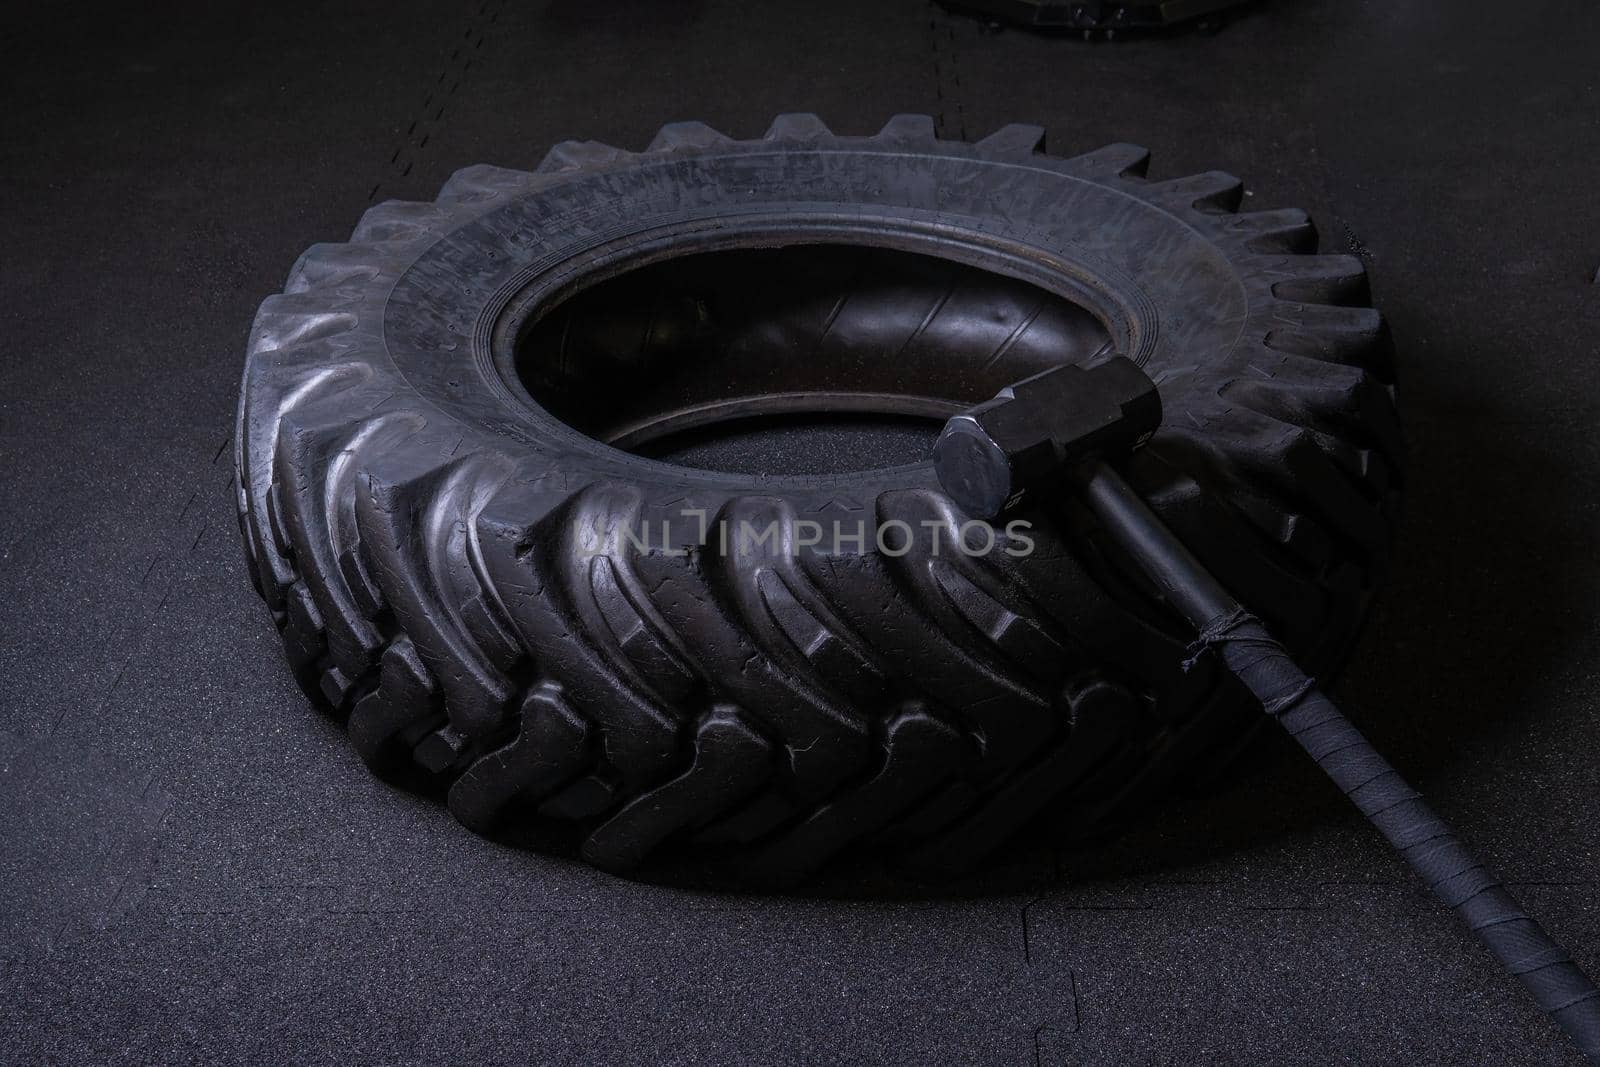 A tire on a black background with a sledgehammer lies for crosfit fitness wheel sledgehammer workout black sport, In the afternoon athlete gym for lifestyle concentration physical, big club. Sweat indoors up, by 89167702191